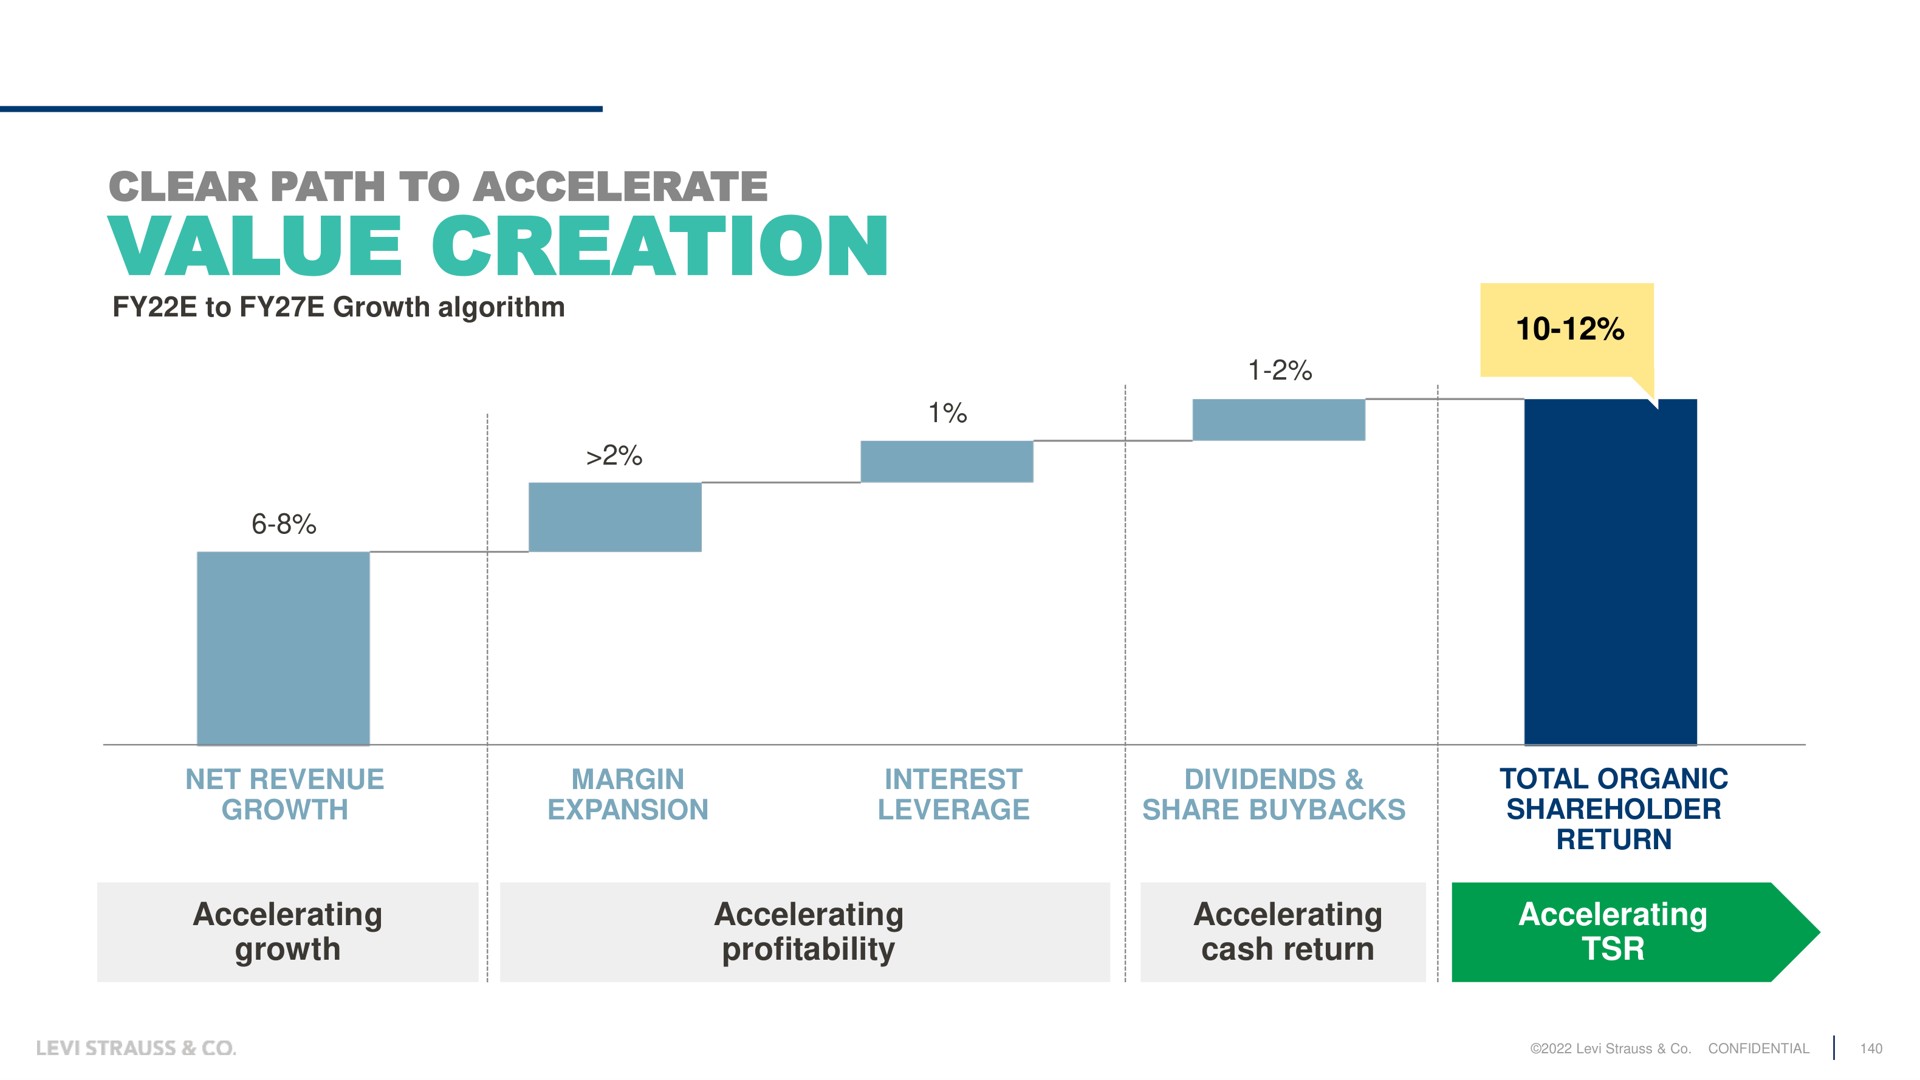 clear path to accelerate value creation growth accelerating growth i expansion leverage share shareholder return accelerating profitability accelerating cash return accelerating | Levi Strauss